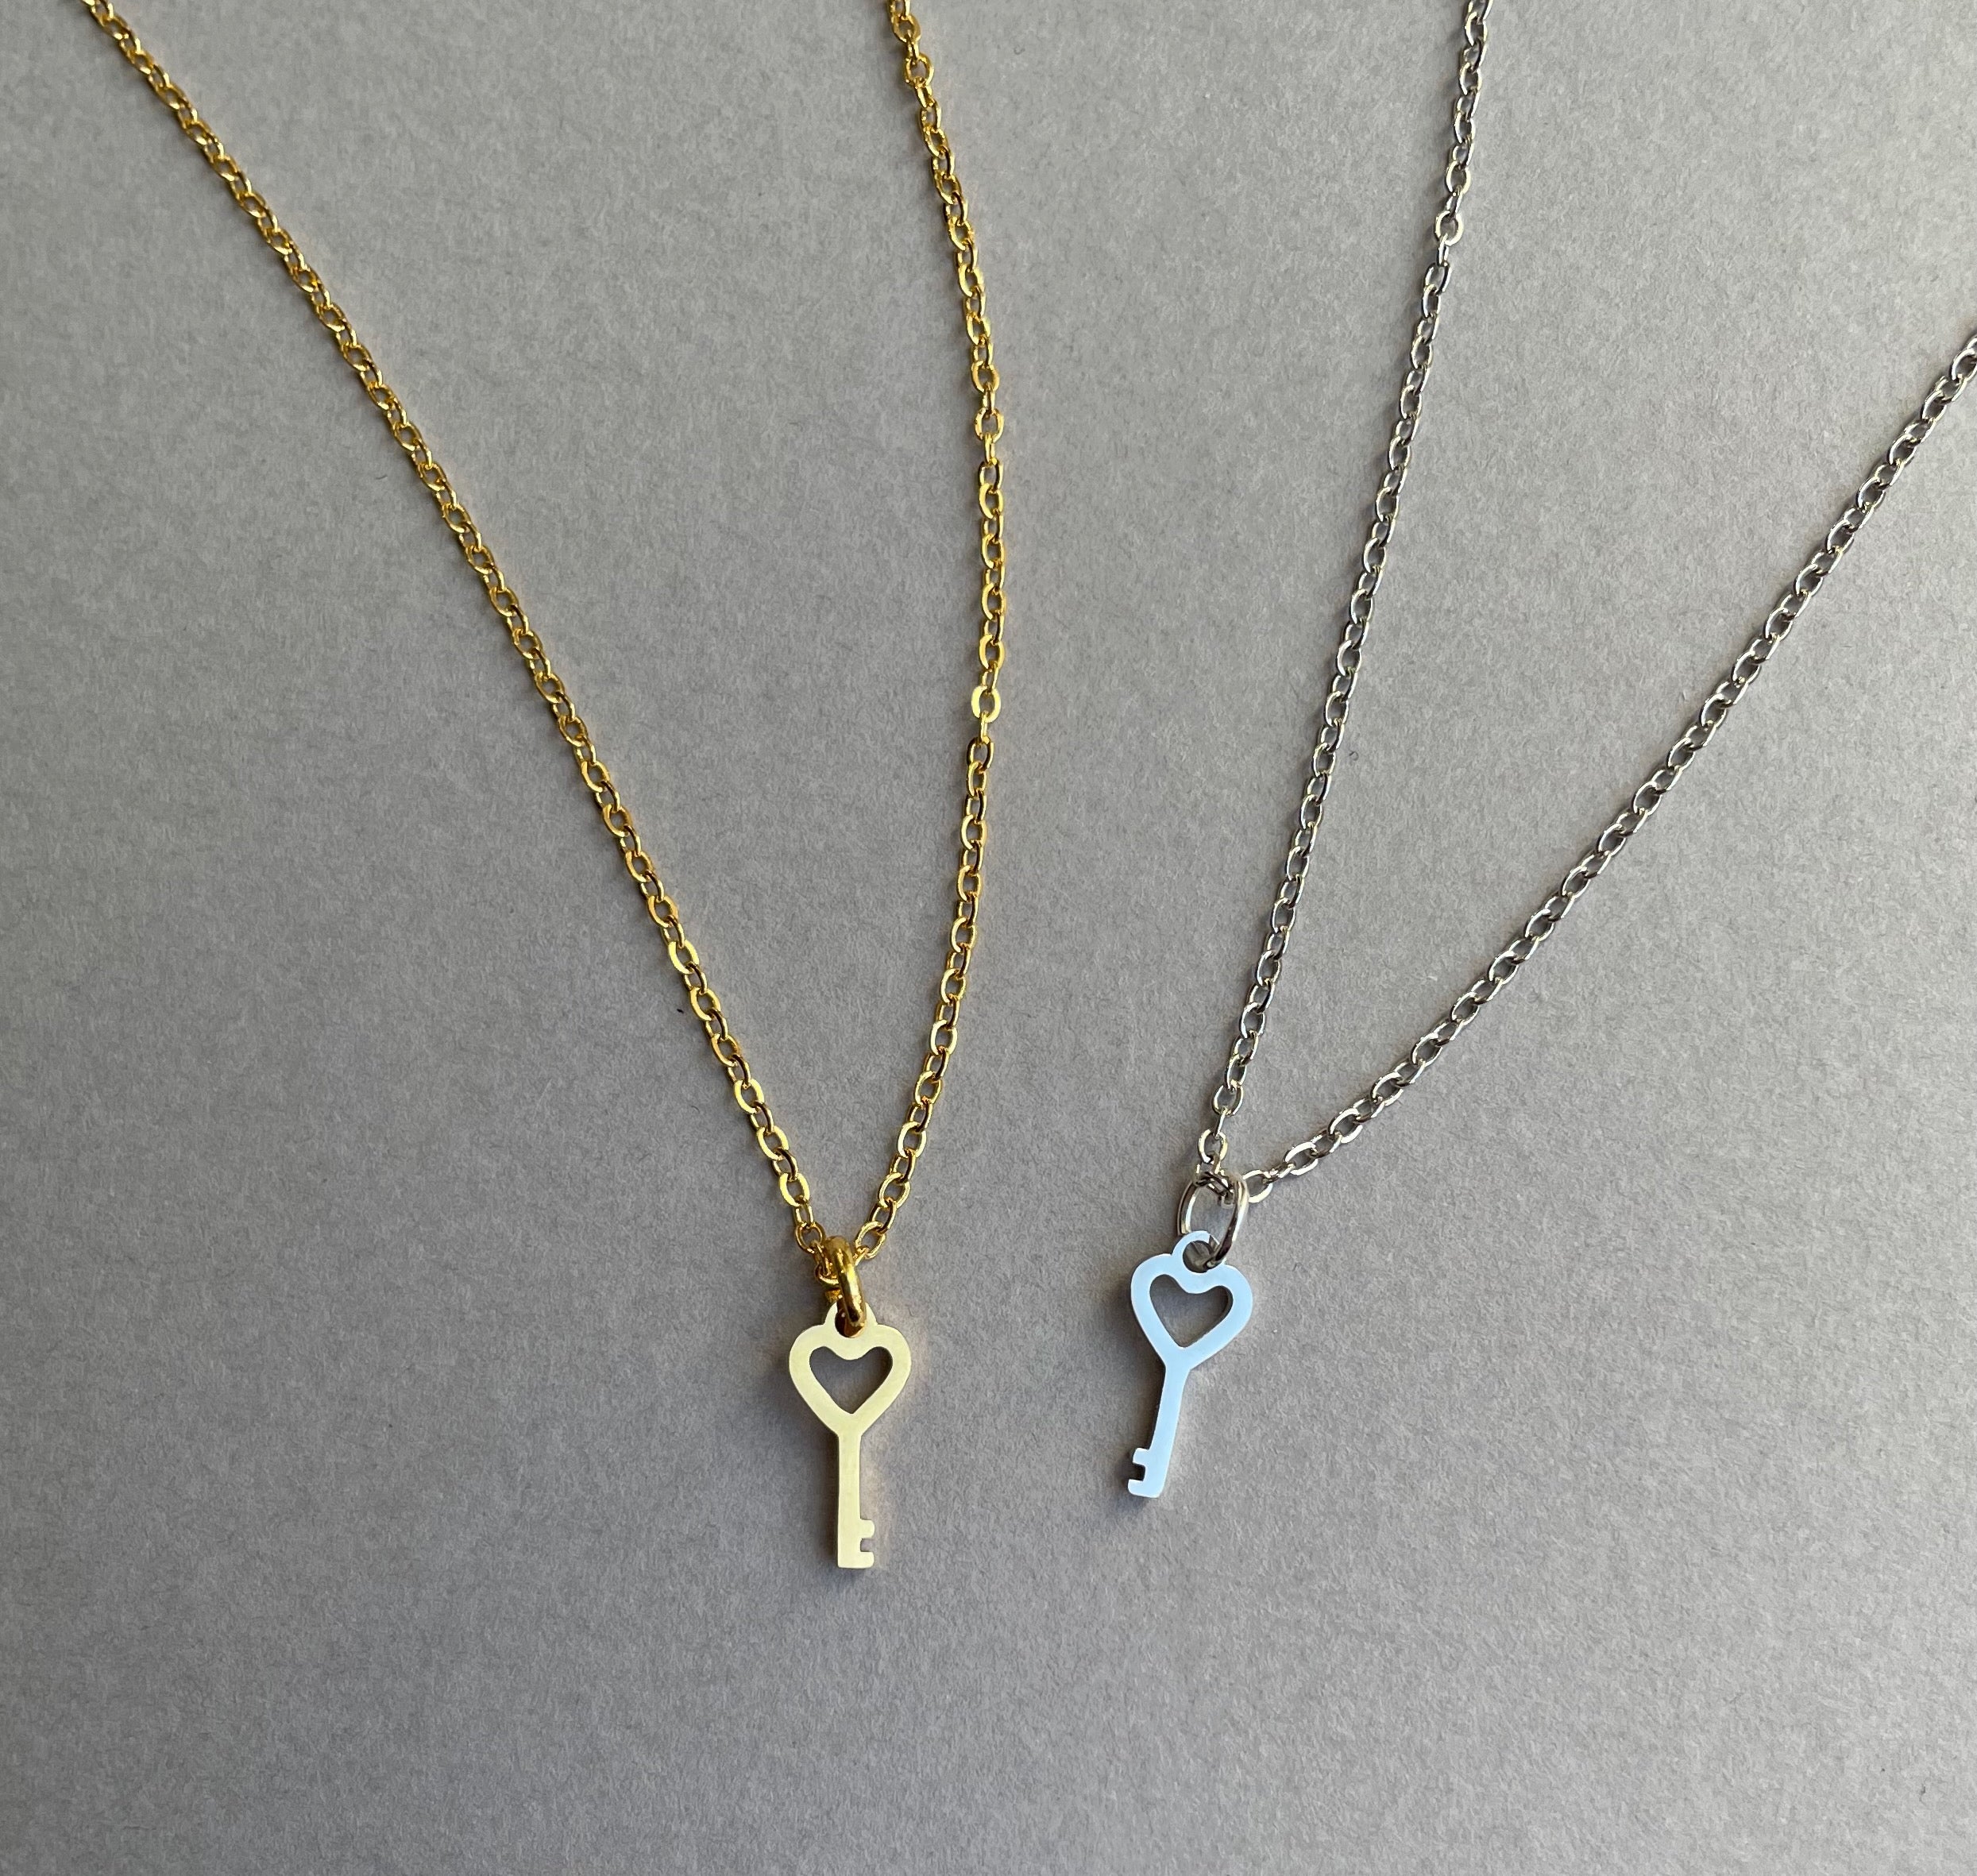 Small Lock and Key Necklace